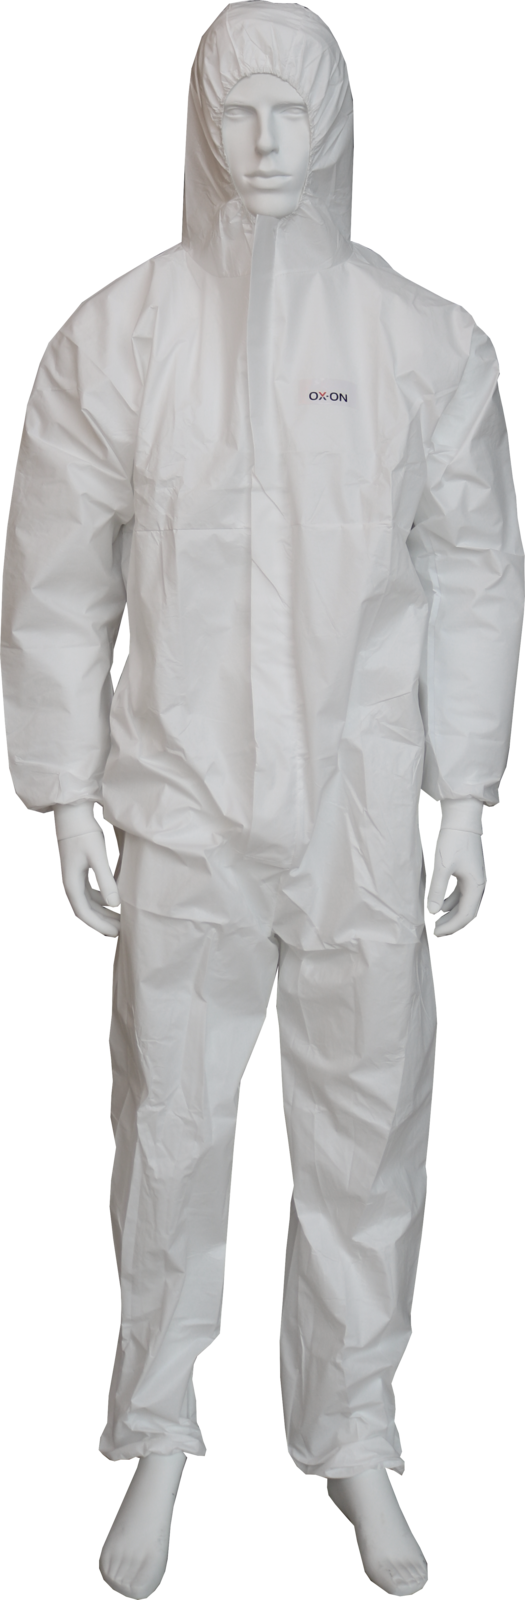 OX-ON Coverall Comfort 301.62